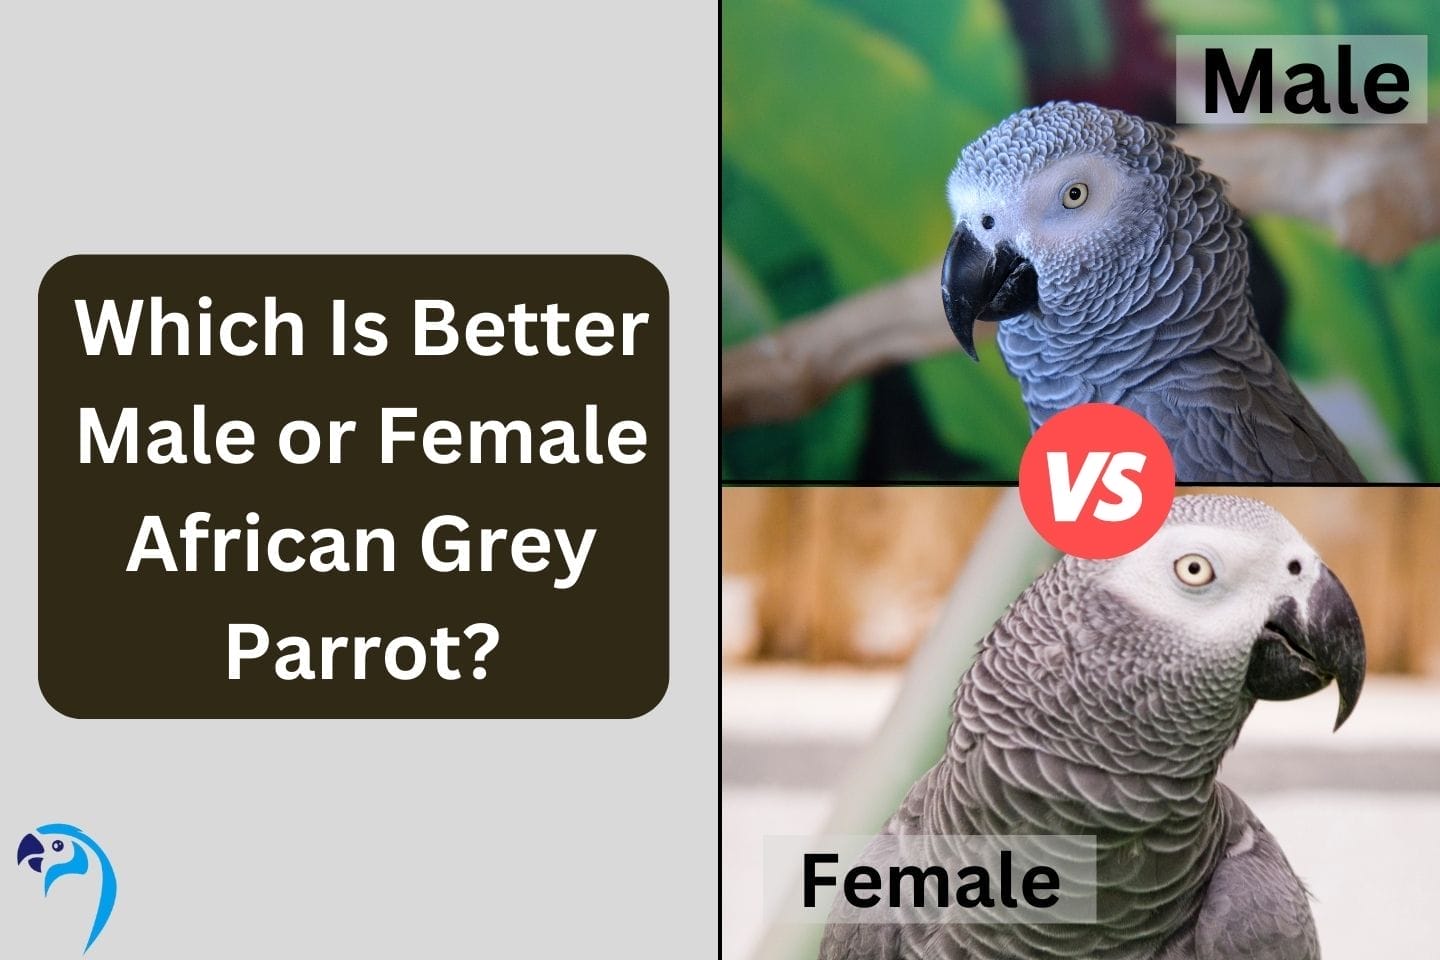 Which Is Better Male or Female African Grey Parrot?